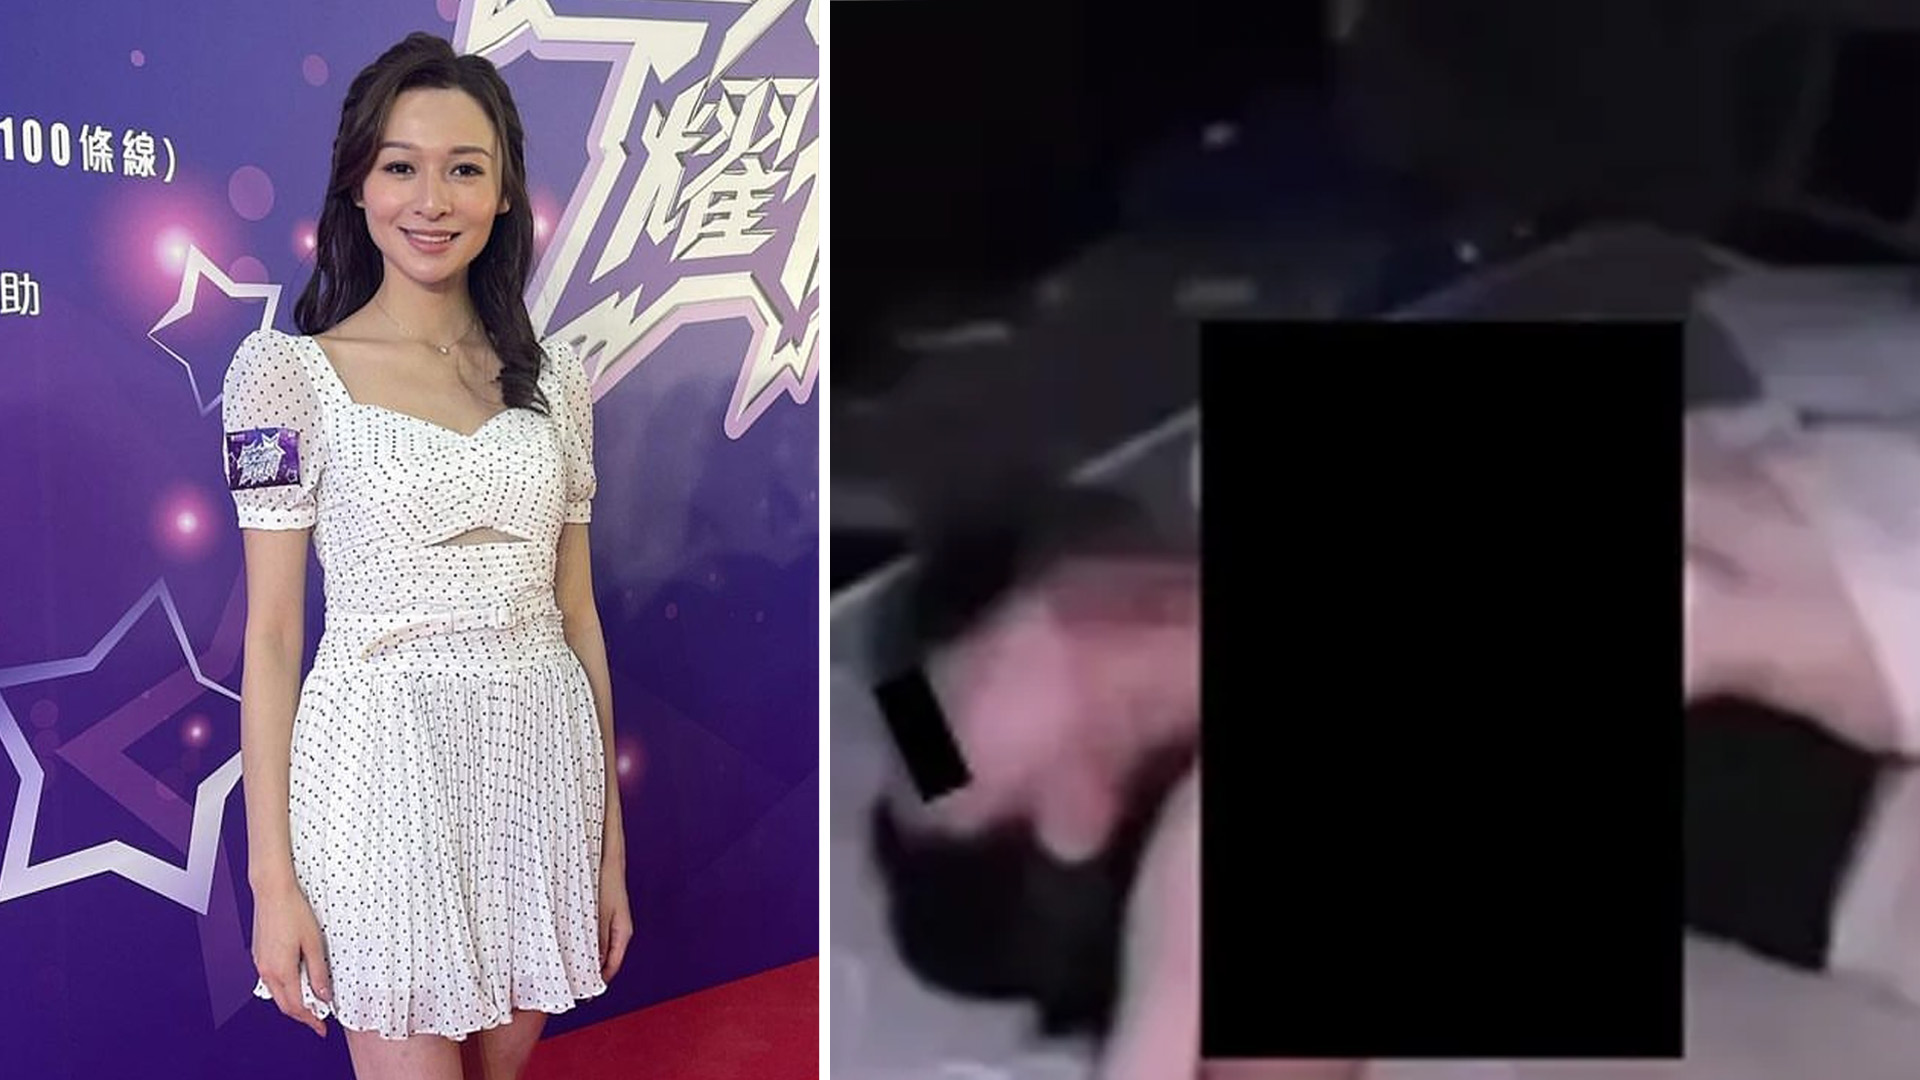 Reaped Sex Video - Miss Hong Kong 2022 Denice Lam Denies She Is The Woman In Alleged Sex Tape  - 8days